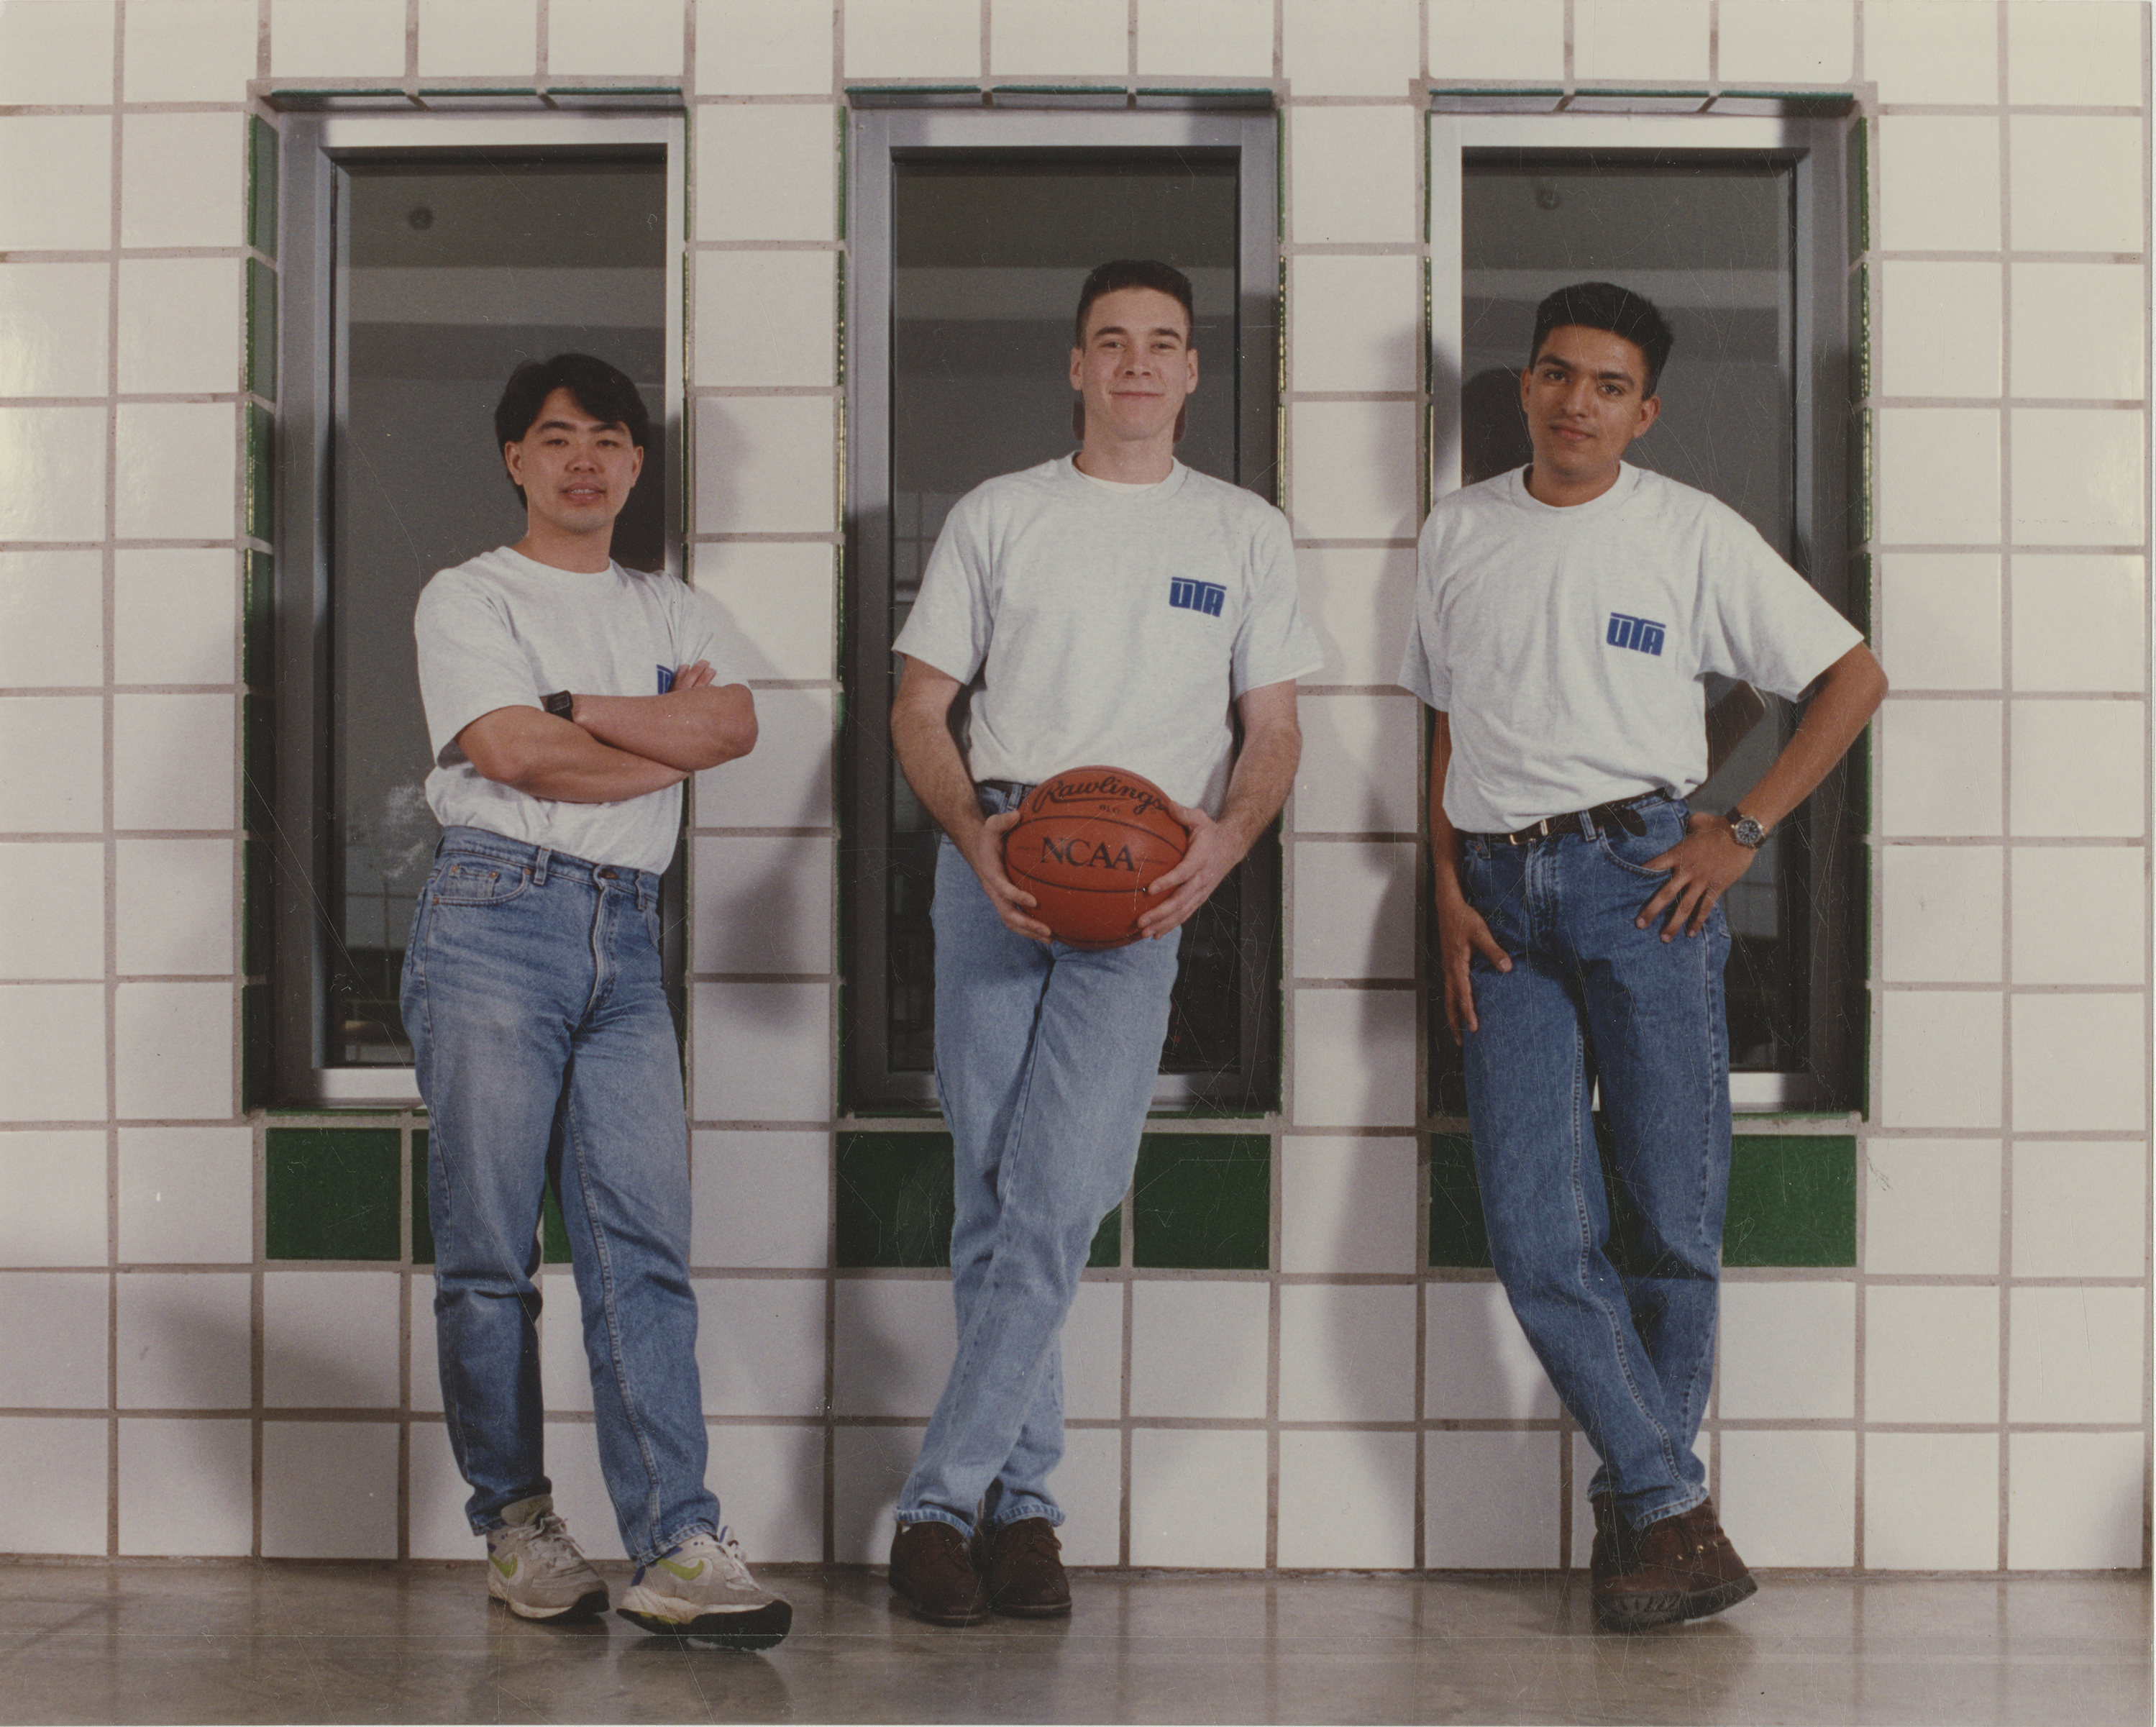 Chee He, Juan Pulido and Lee Castillo, assistants to the champion Movin' Mavs 1992 basketball team